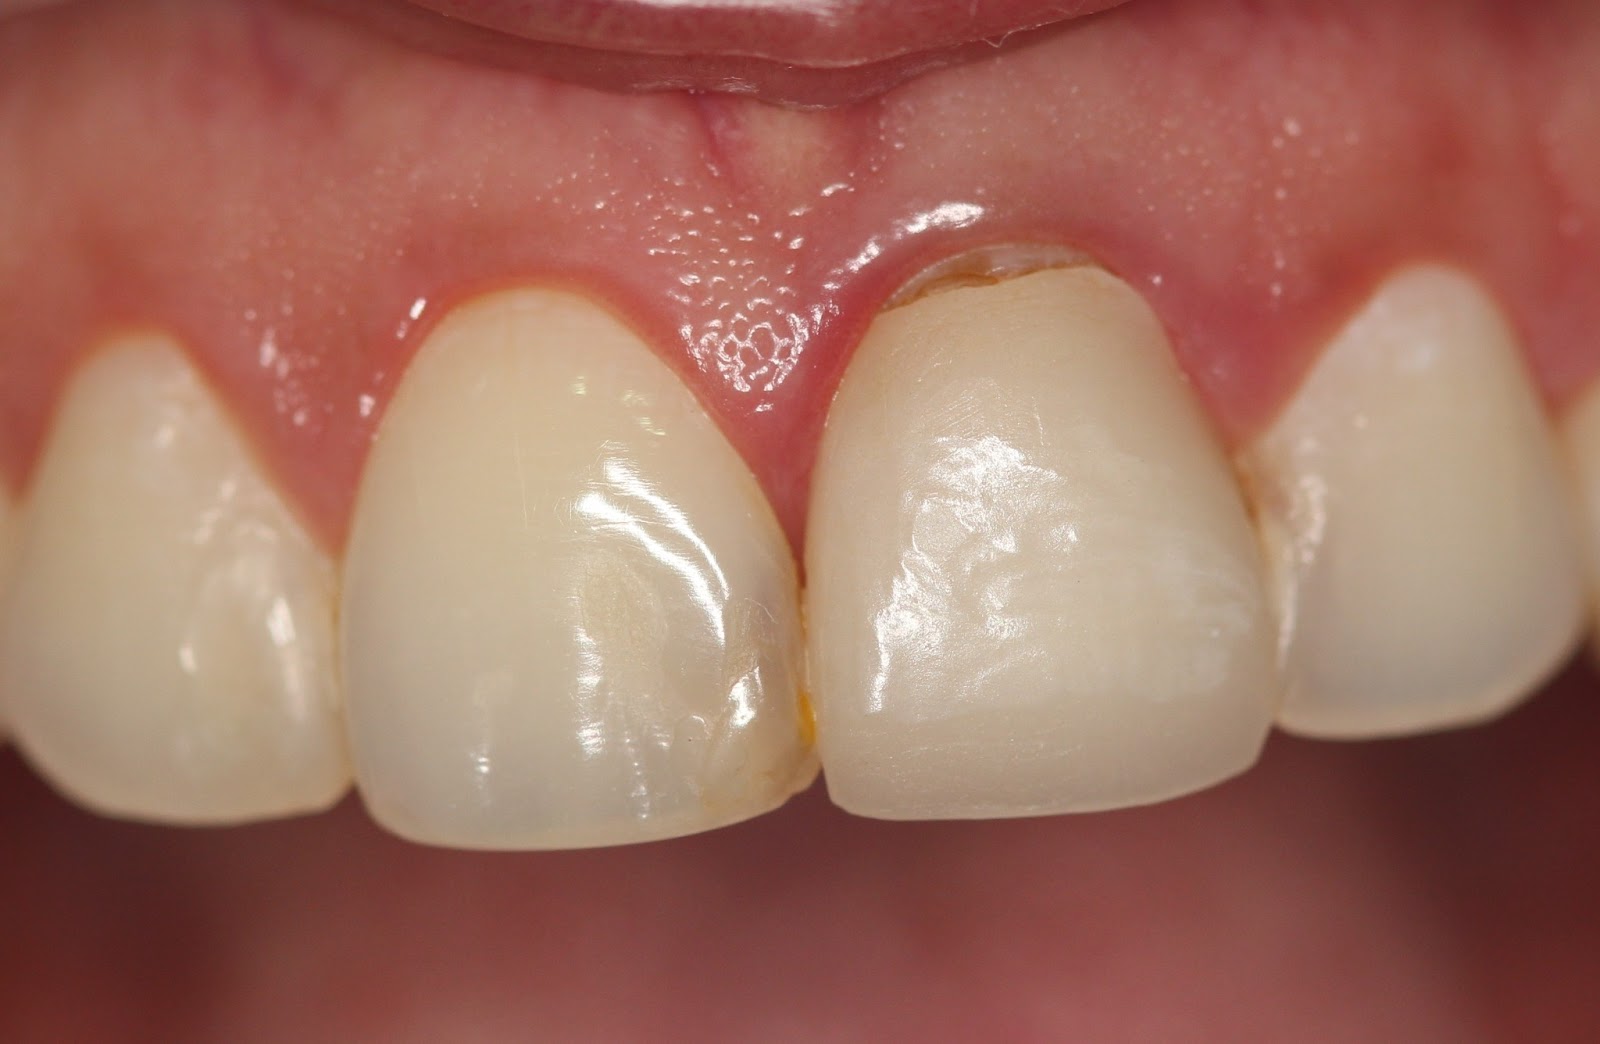 Orthotrain: Fracture of an Upper Incisor Restoration